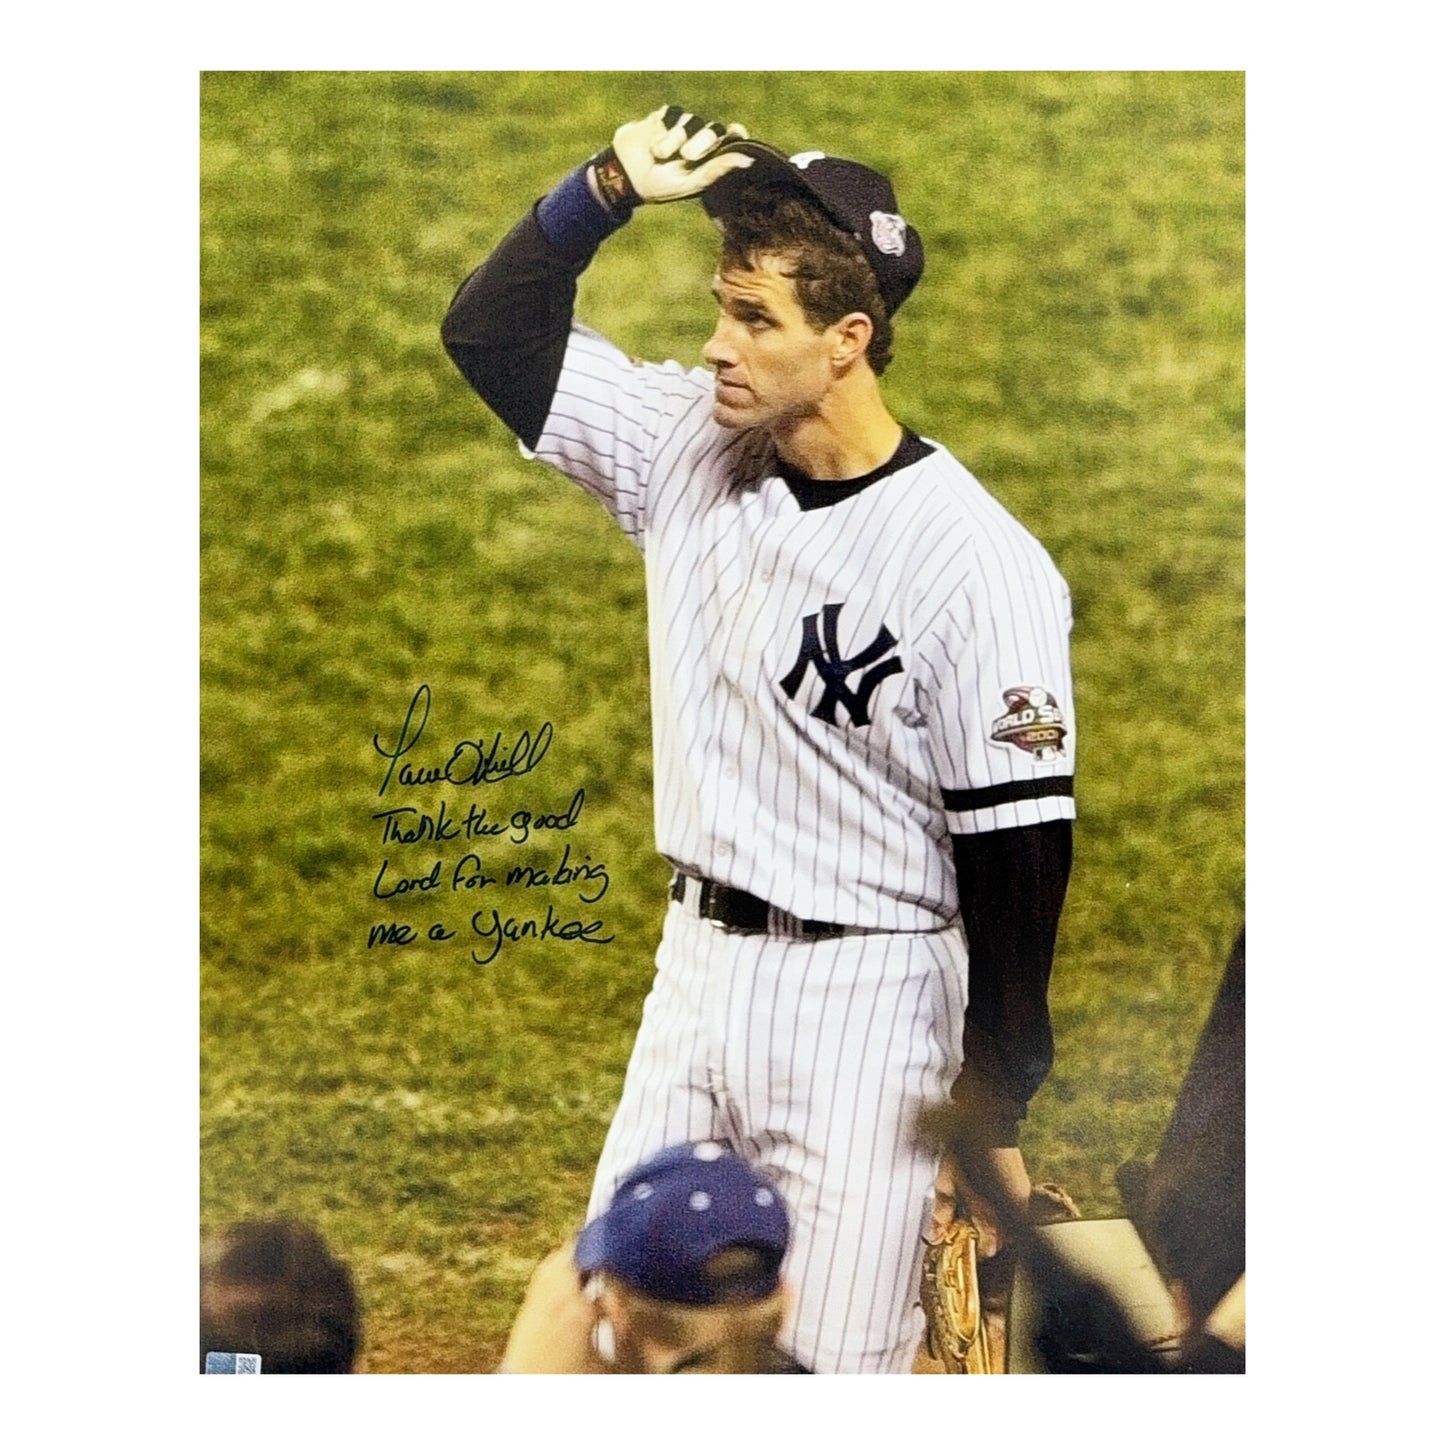 Paul O’Neill Autographed New York Yankees Cap Tip 16x20 “Thank the Good Lord for Making Me a Yankee” Inscription Steiner CX